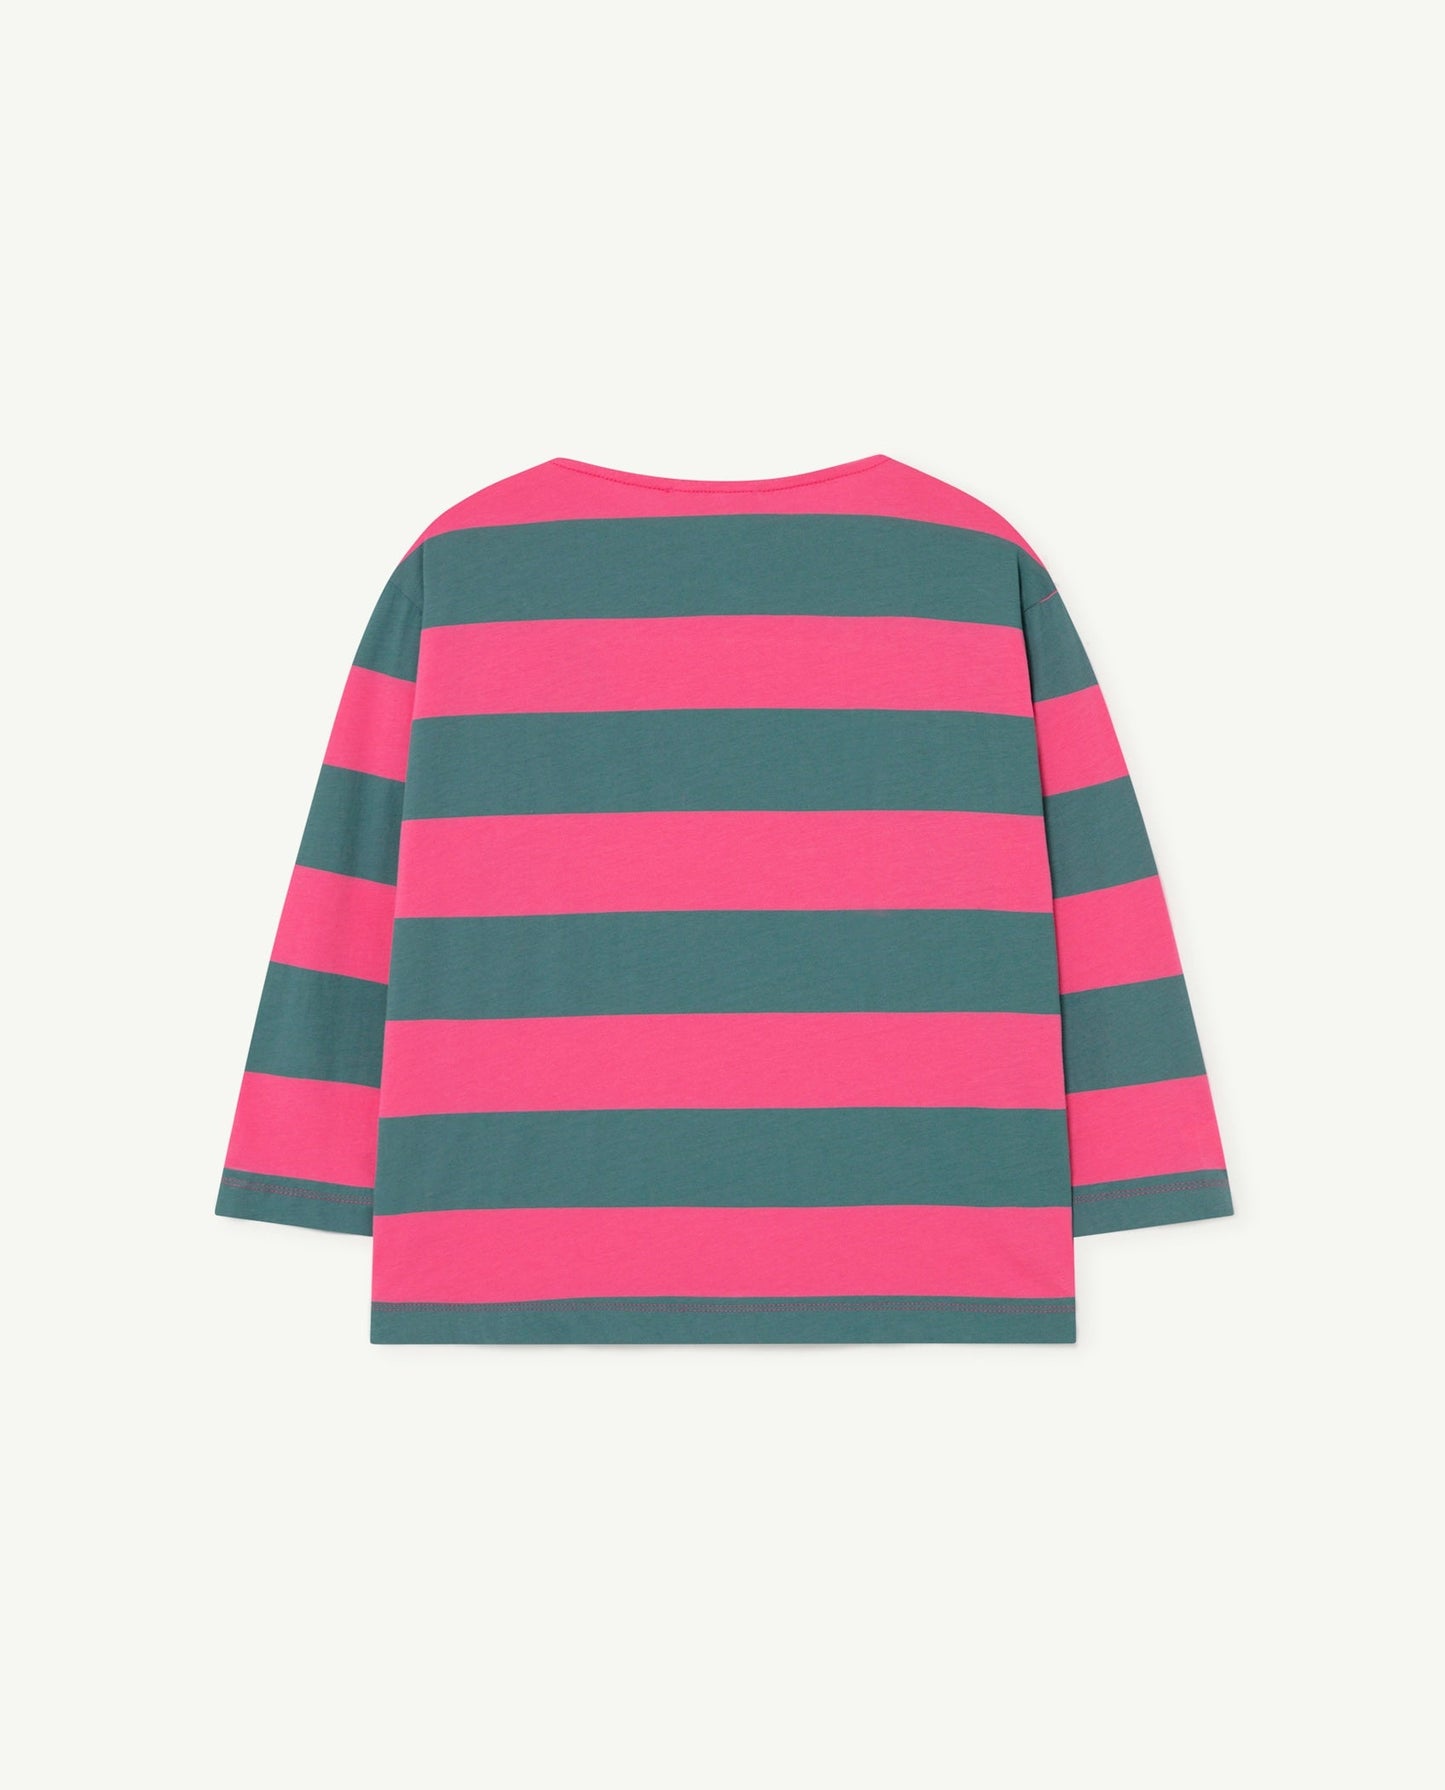 Anteater kids t-shirt pink Stripes Tops The Animals Observatory 